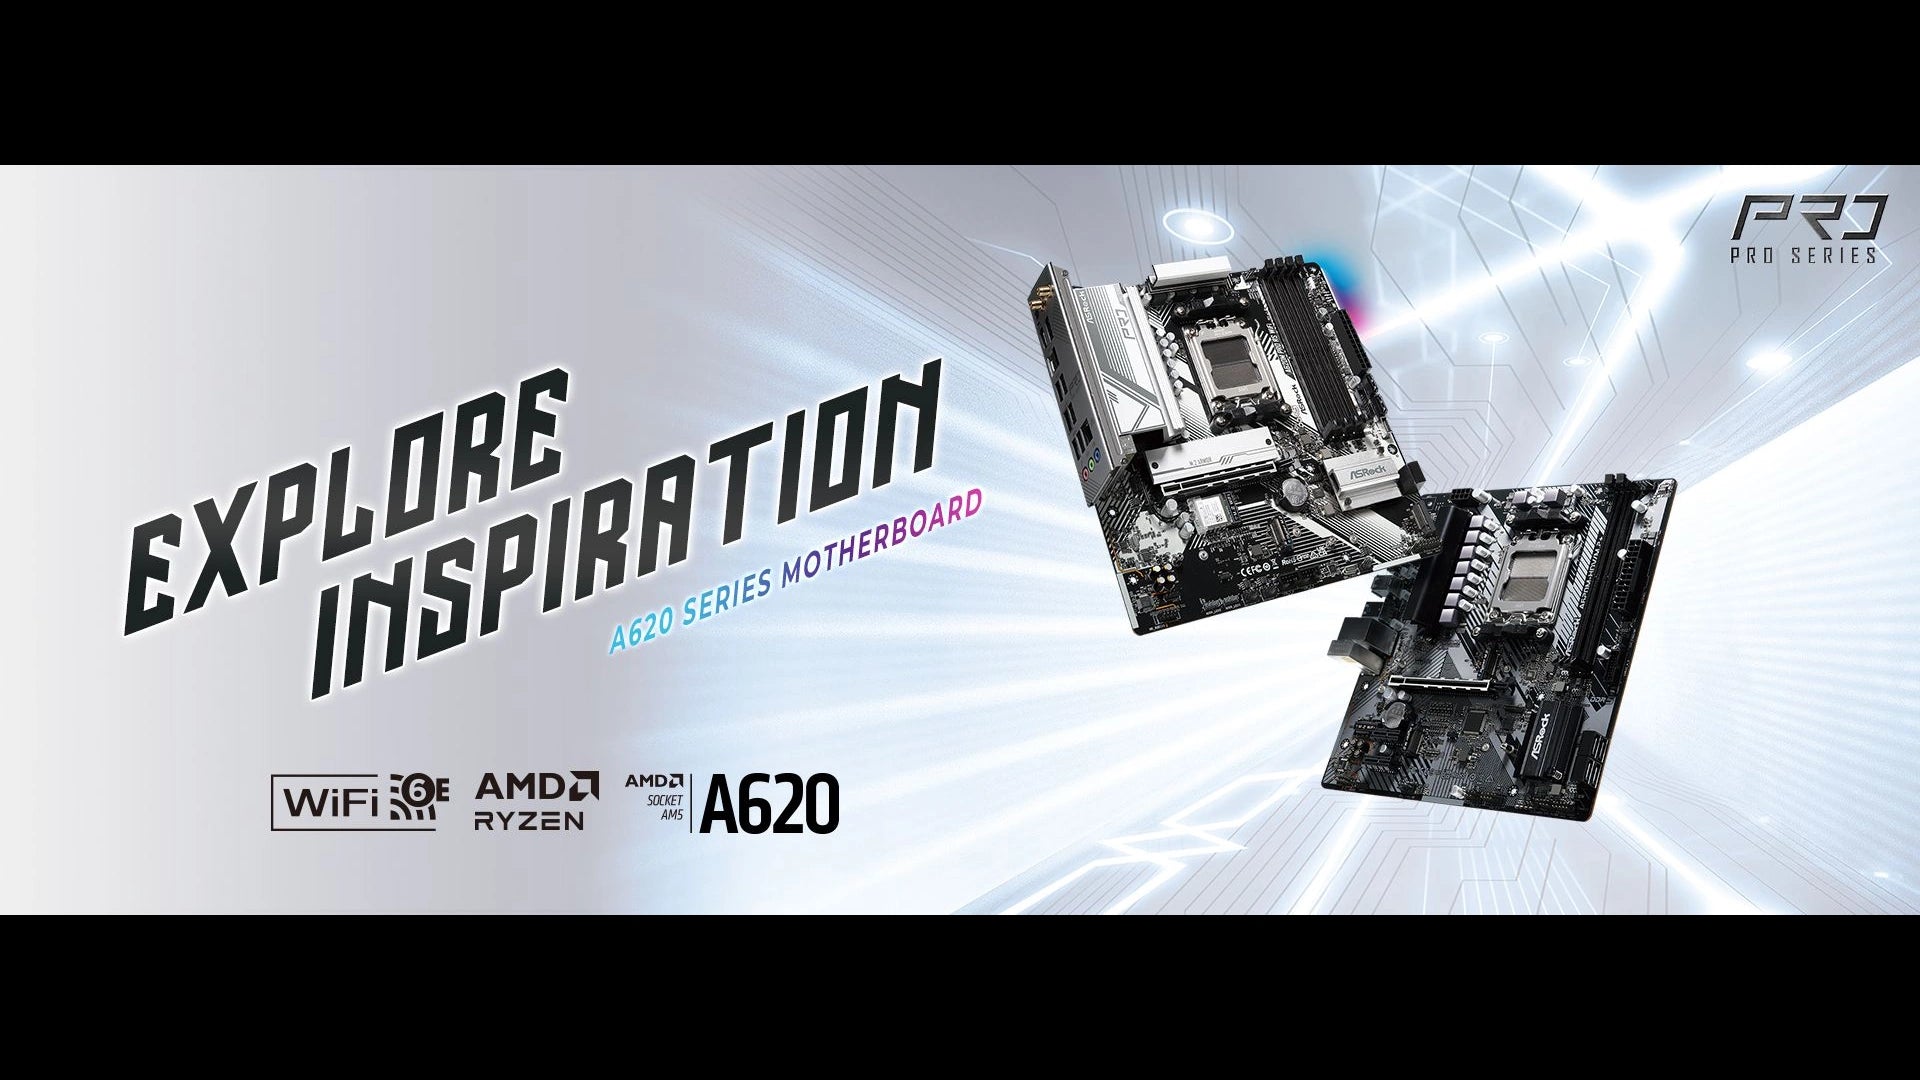 ASRock Launches AMD A620 Motherboards with Outstanding Capability and Affordability - Vektra Computers LLC